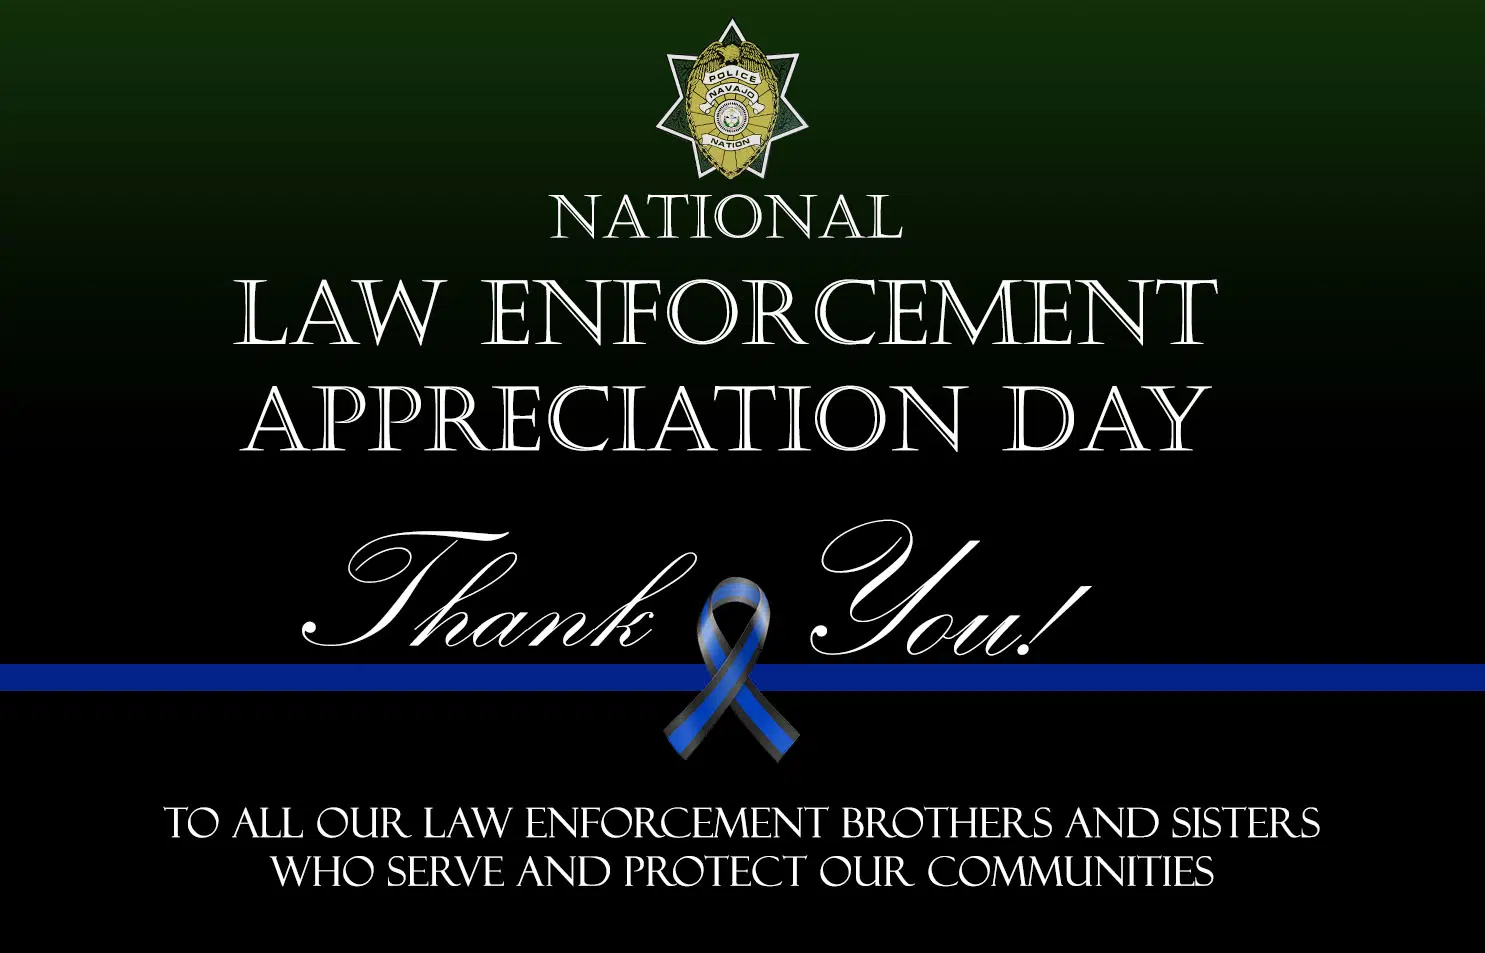 NATIONAL LAW ENFORCEMENT APPRECIATION DAY IS THIS SUNDAY | WSEI Freedom